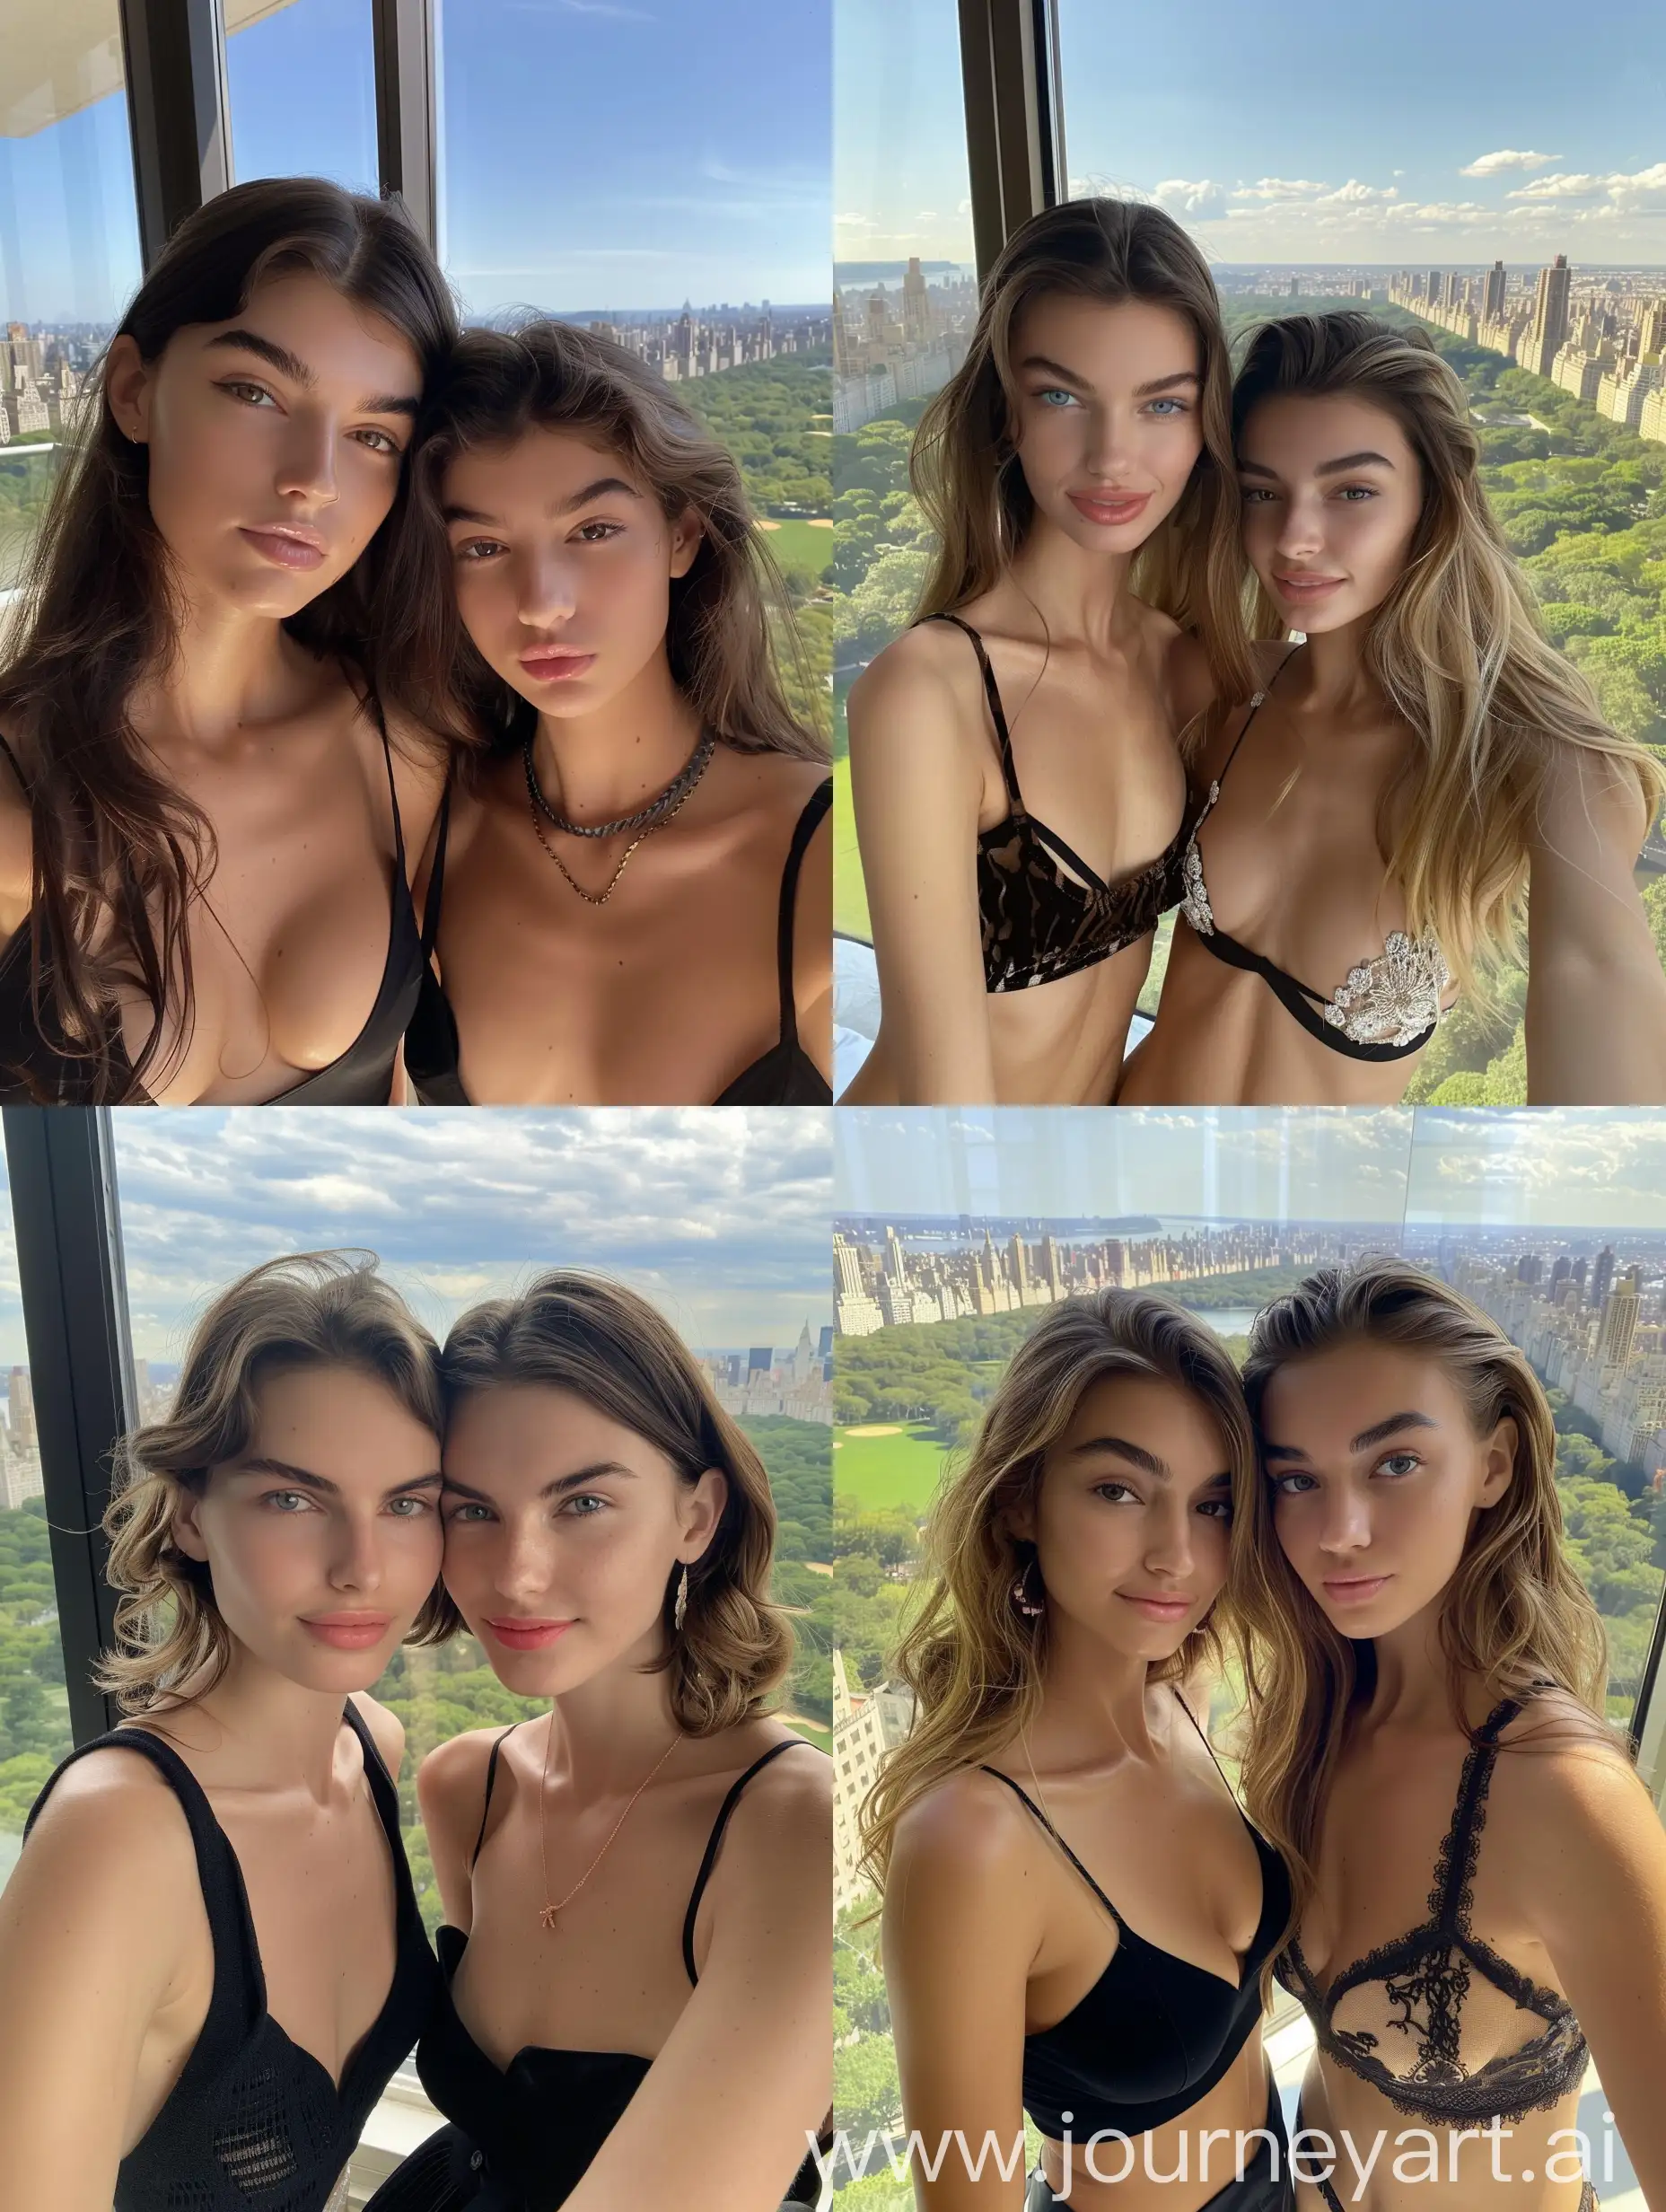 Millionaire-MotherDaughter-Instagram-Selfie-with-Central-Park-View